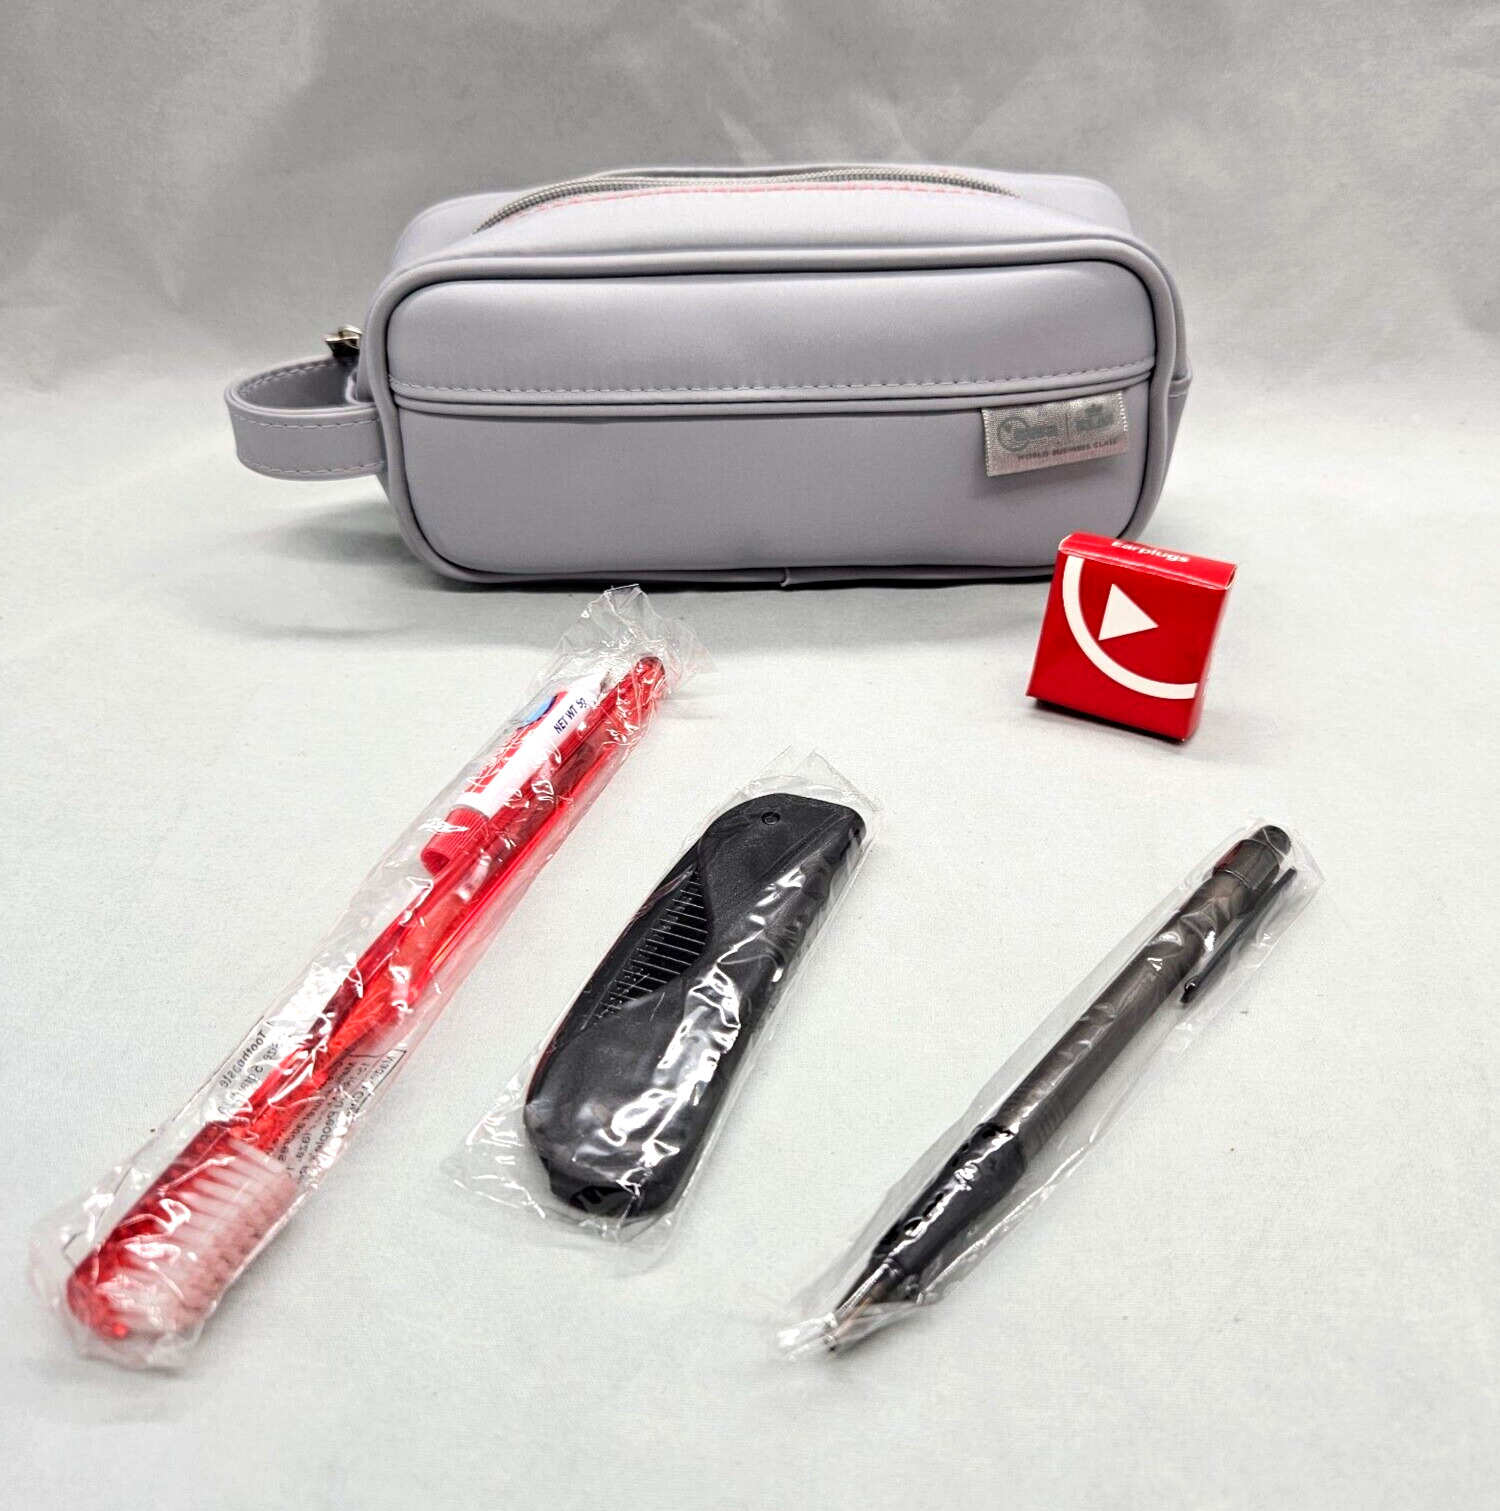 Northwest Airlines NWA KLM Amenity Kit Gray World Business Class Toiletry Bag